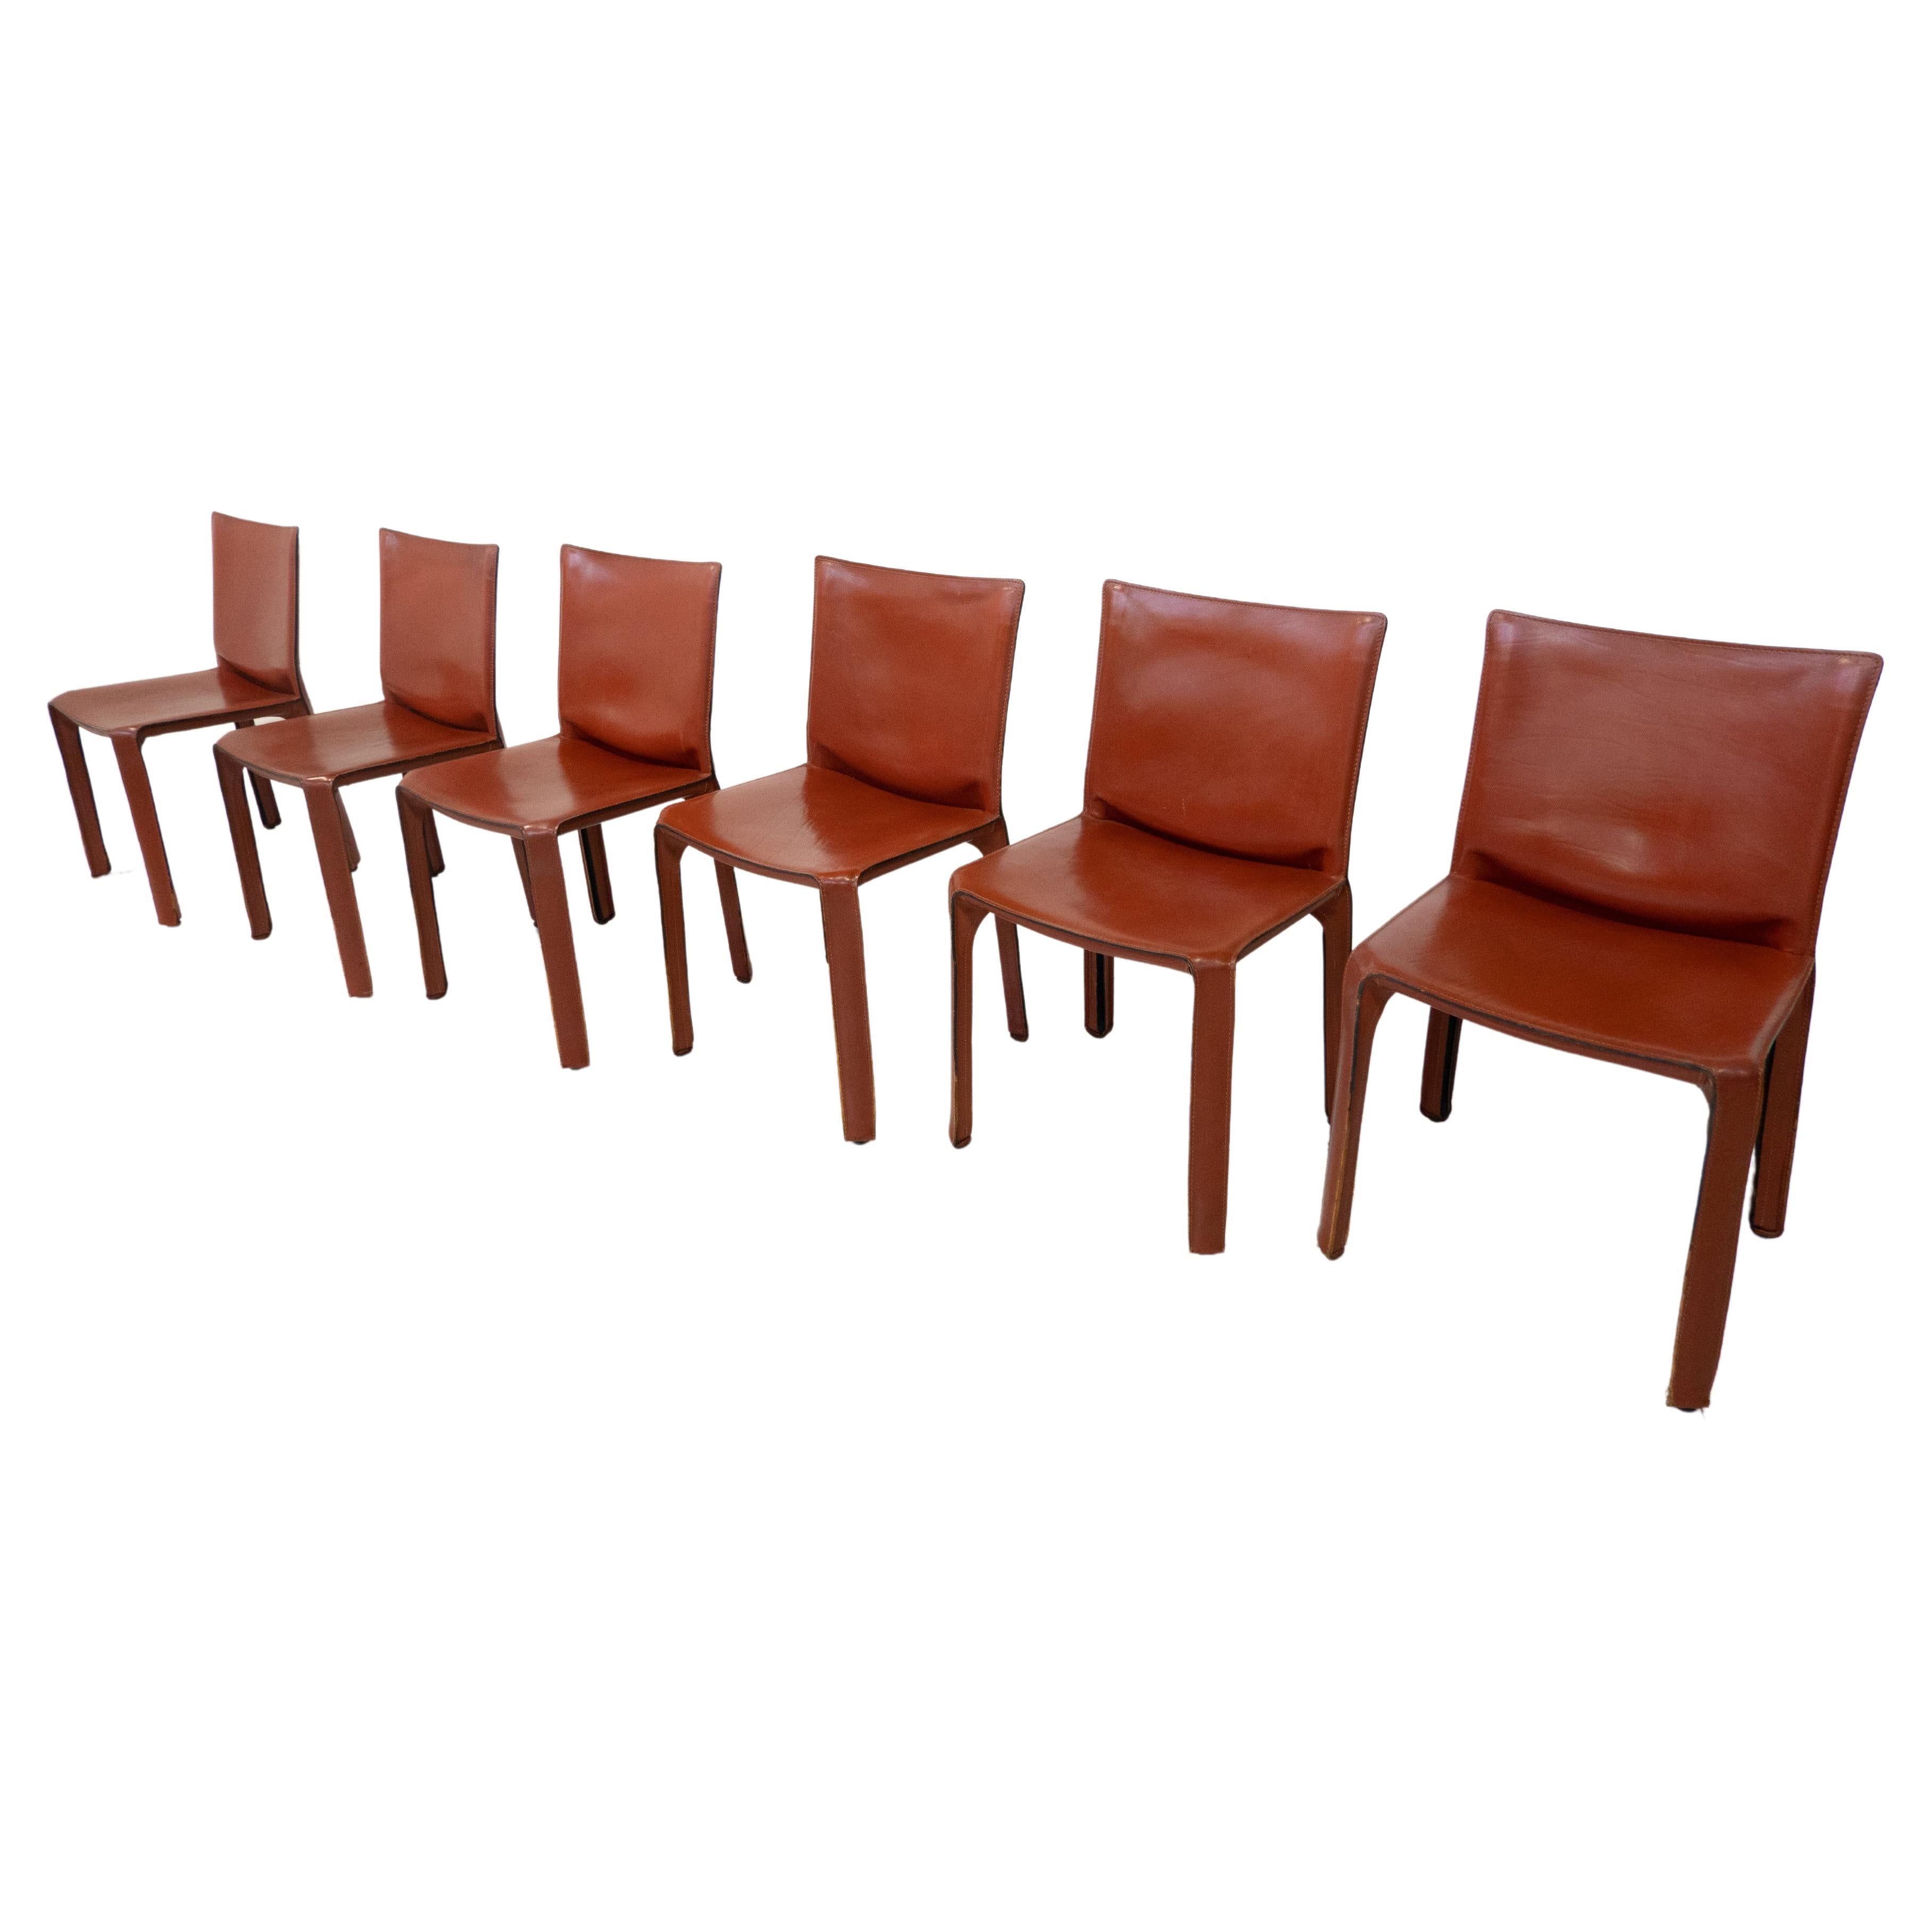 Mid-Century Modern Set of 6 Chairs Model CAB 412 by Mario Bellini for Casina For Sale